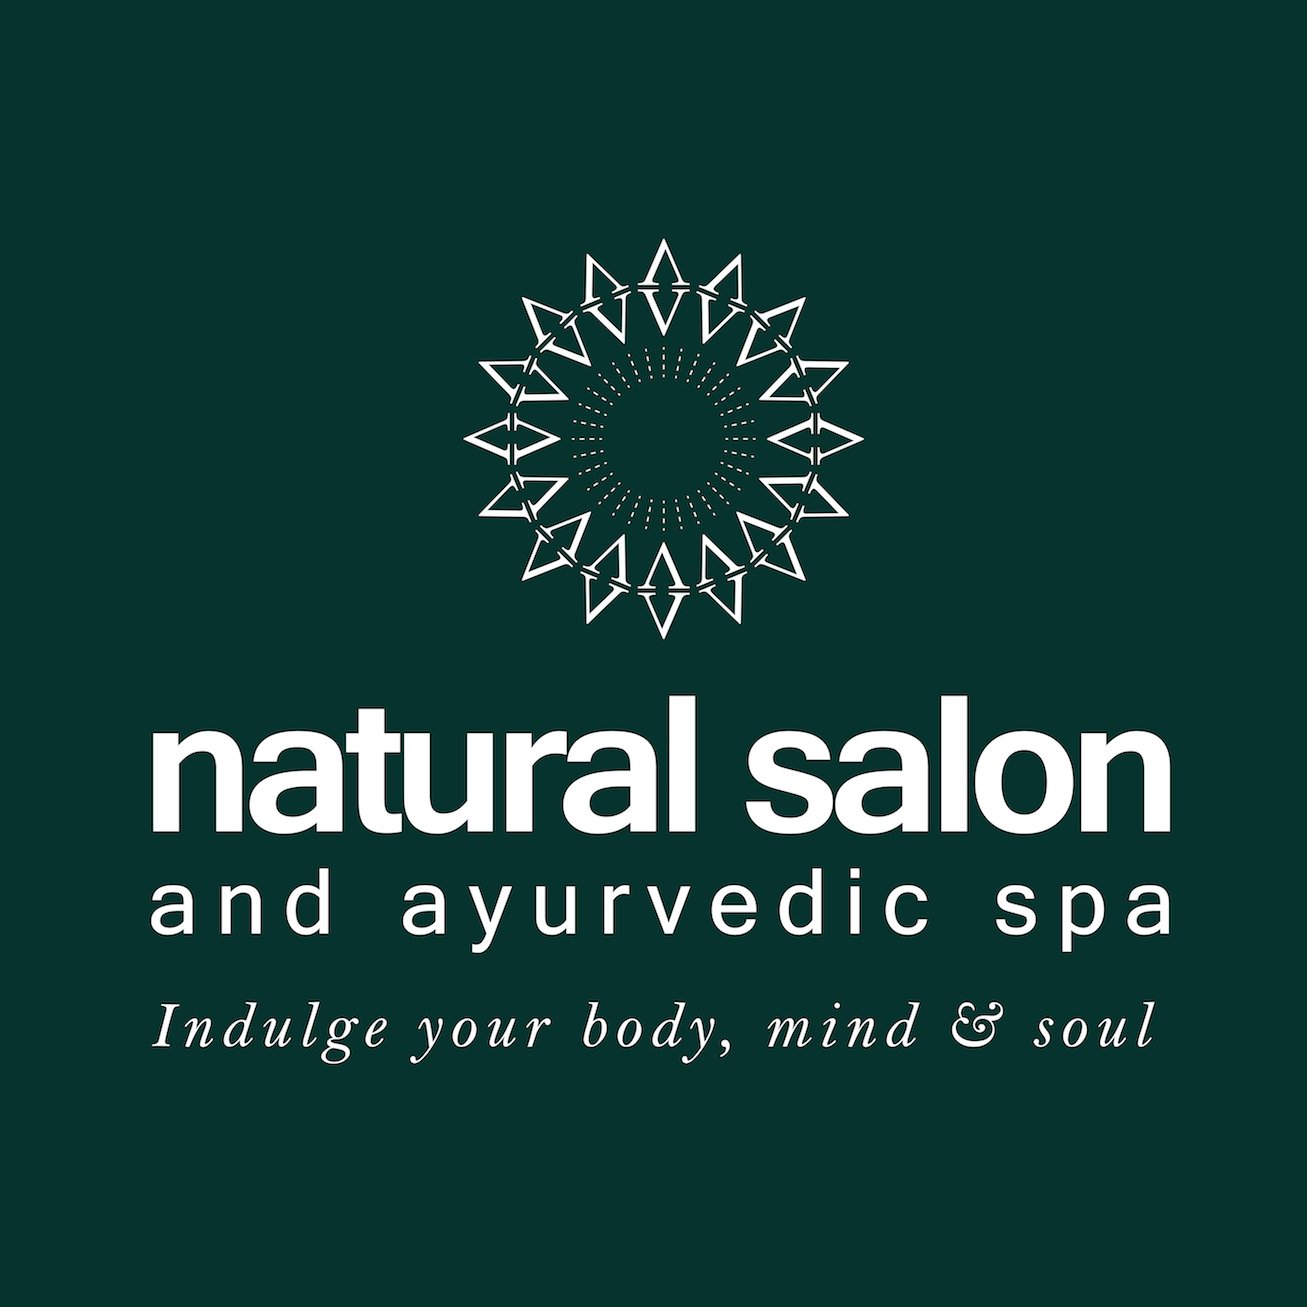 Natural Salon offers full range of salon and spa services to entire family at affordable prices.